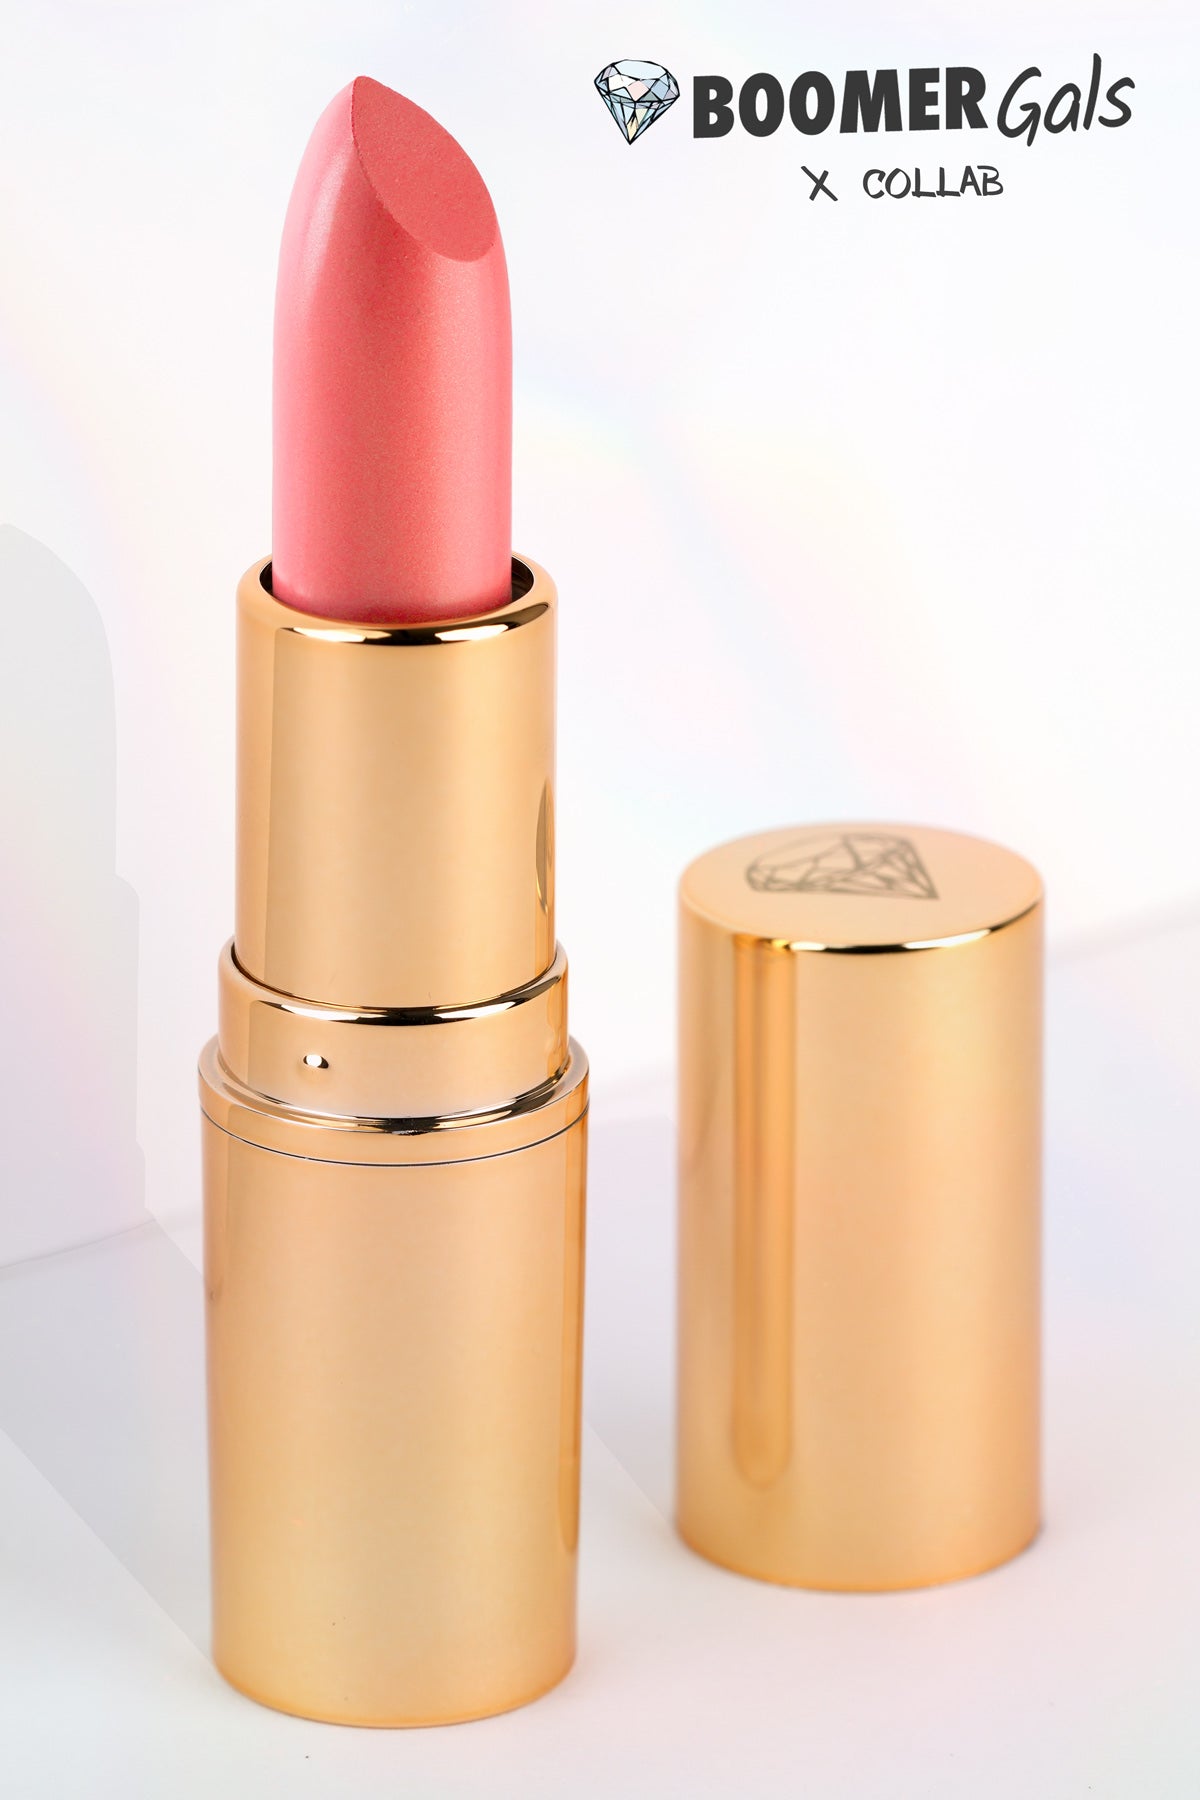 'Kimberly’s coral pink' Boomer Gals - Ultra Lux Hydrating Lipstick